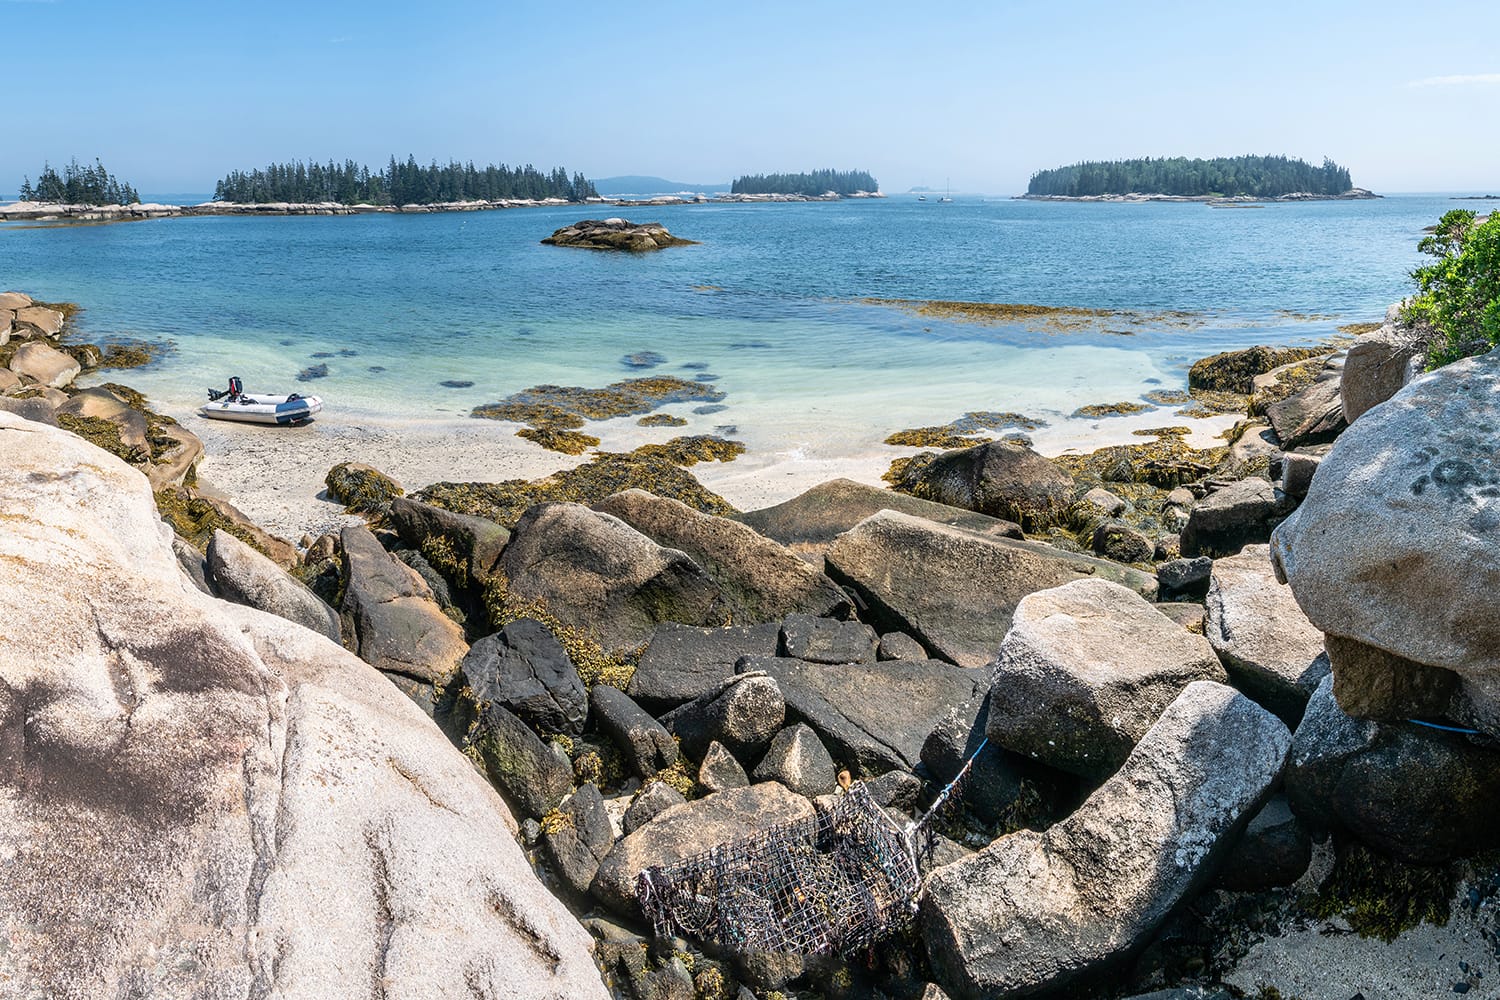 A view of the White Island archipelago from South Big Garden Island near Vinalhaven, Maine in Penobscott Bay.